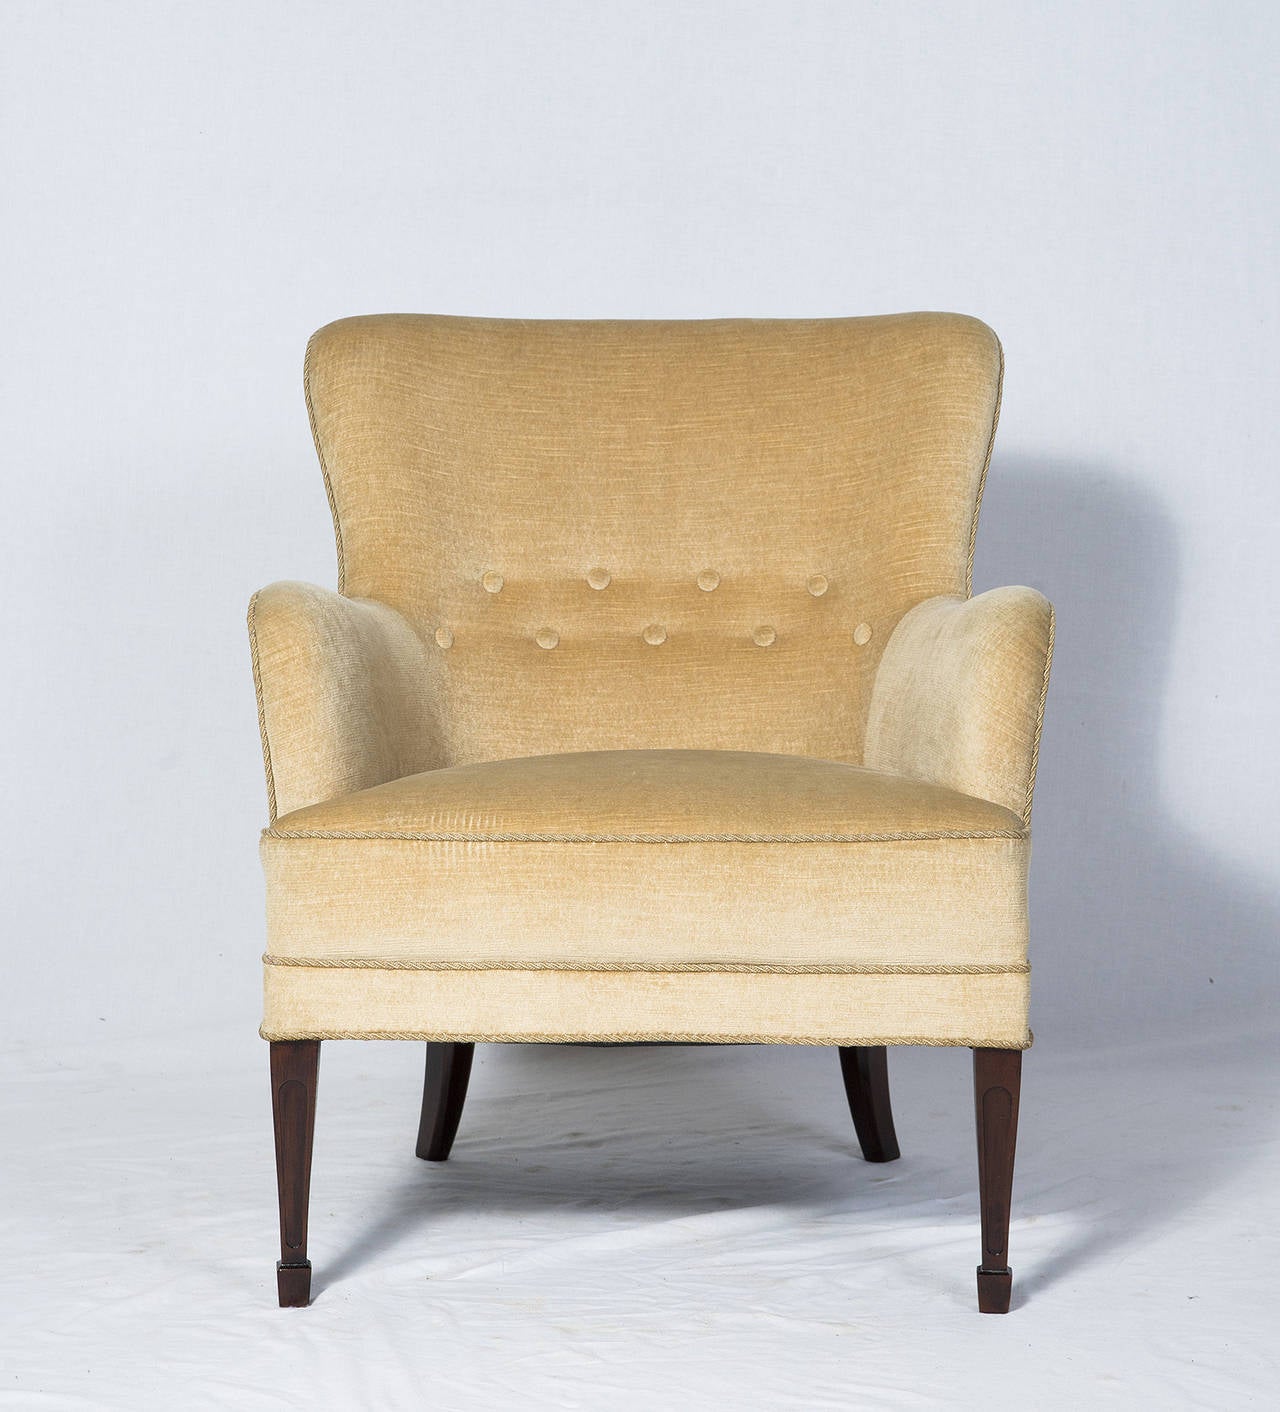 Frits Henningsen lounge chair.   Store formerly known as ARTFUL DODGER INC